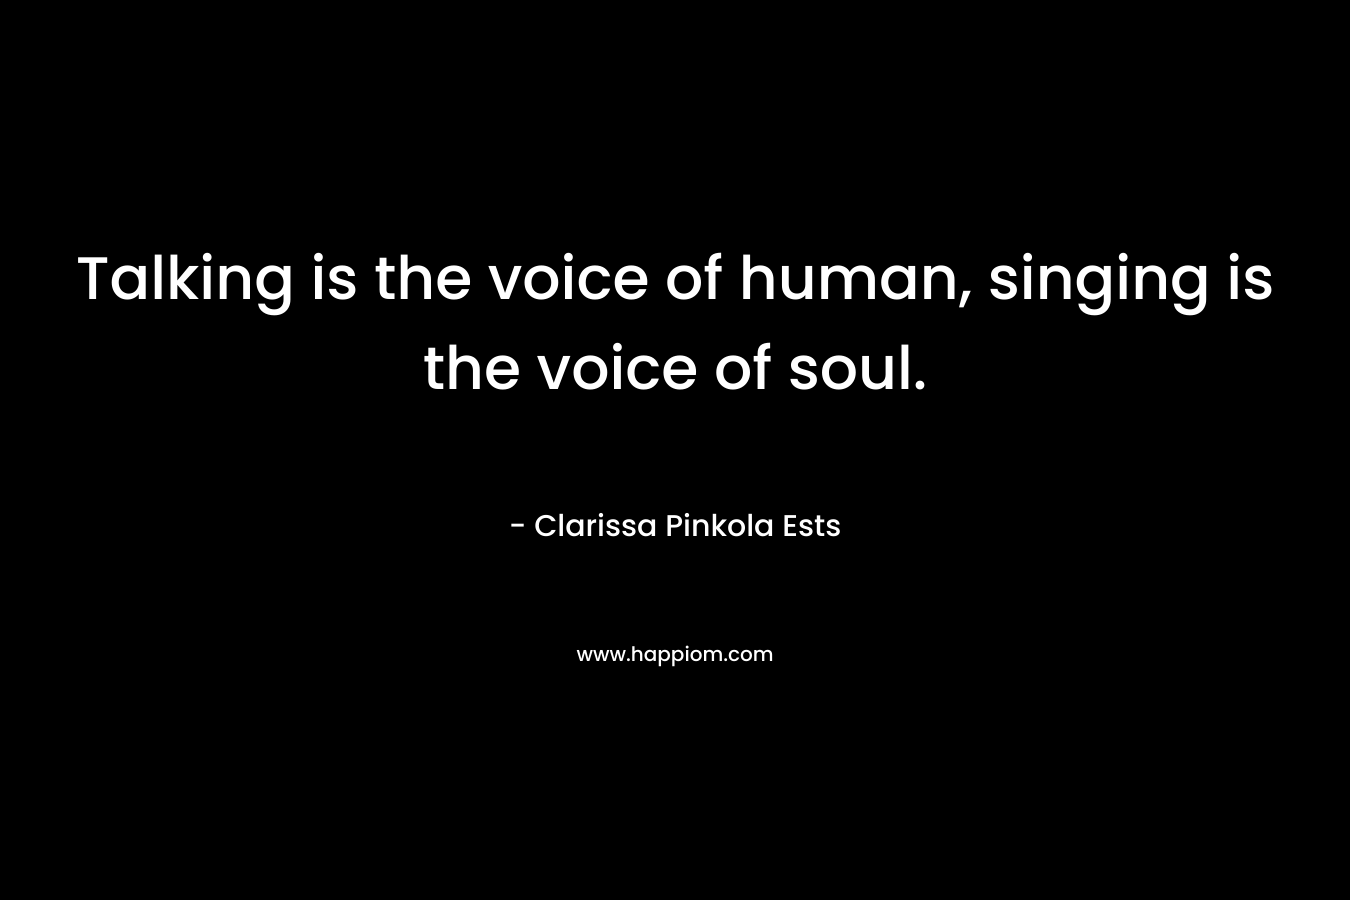 Talking is the voice of human, singing is the voice of soul. – Clarissa Pinkola Ests